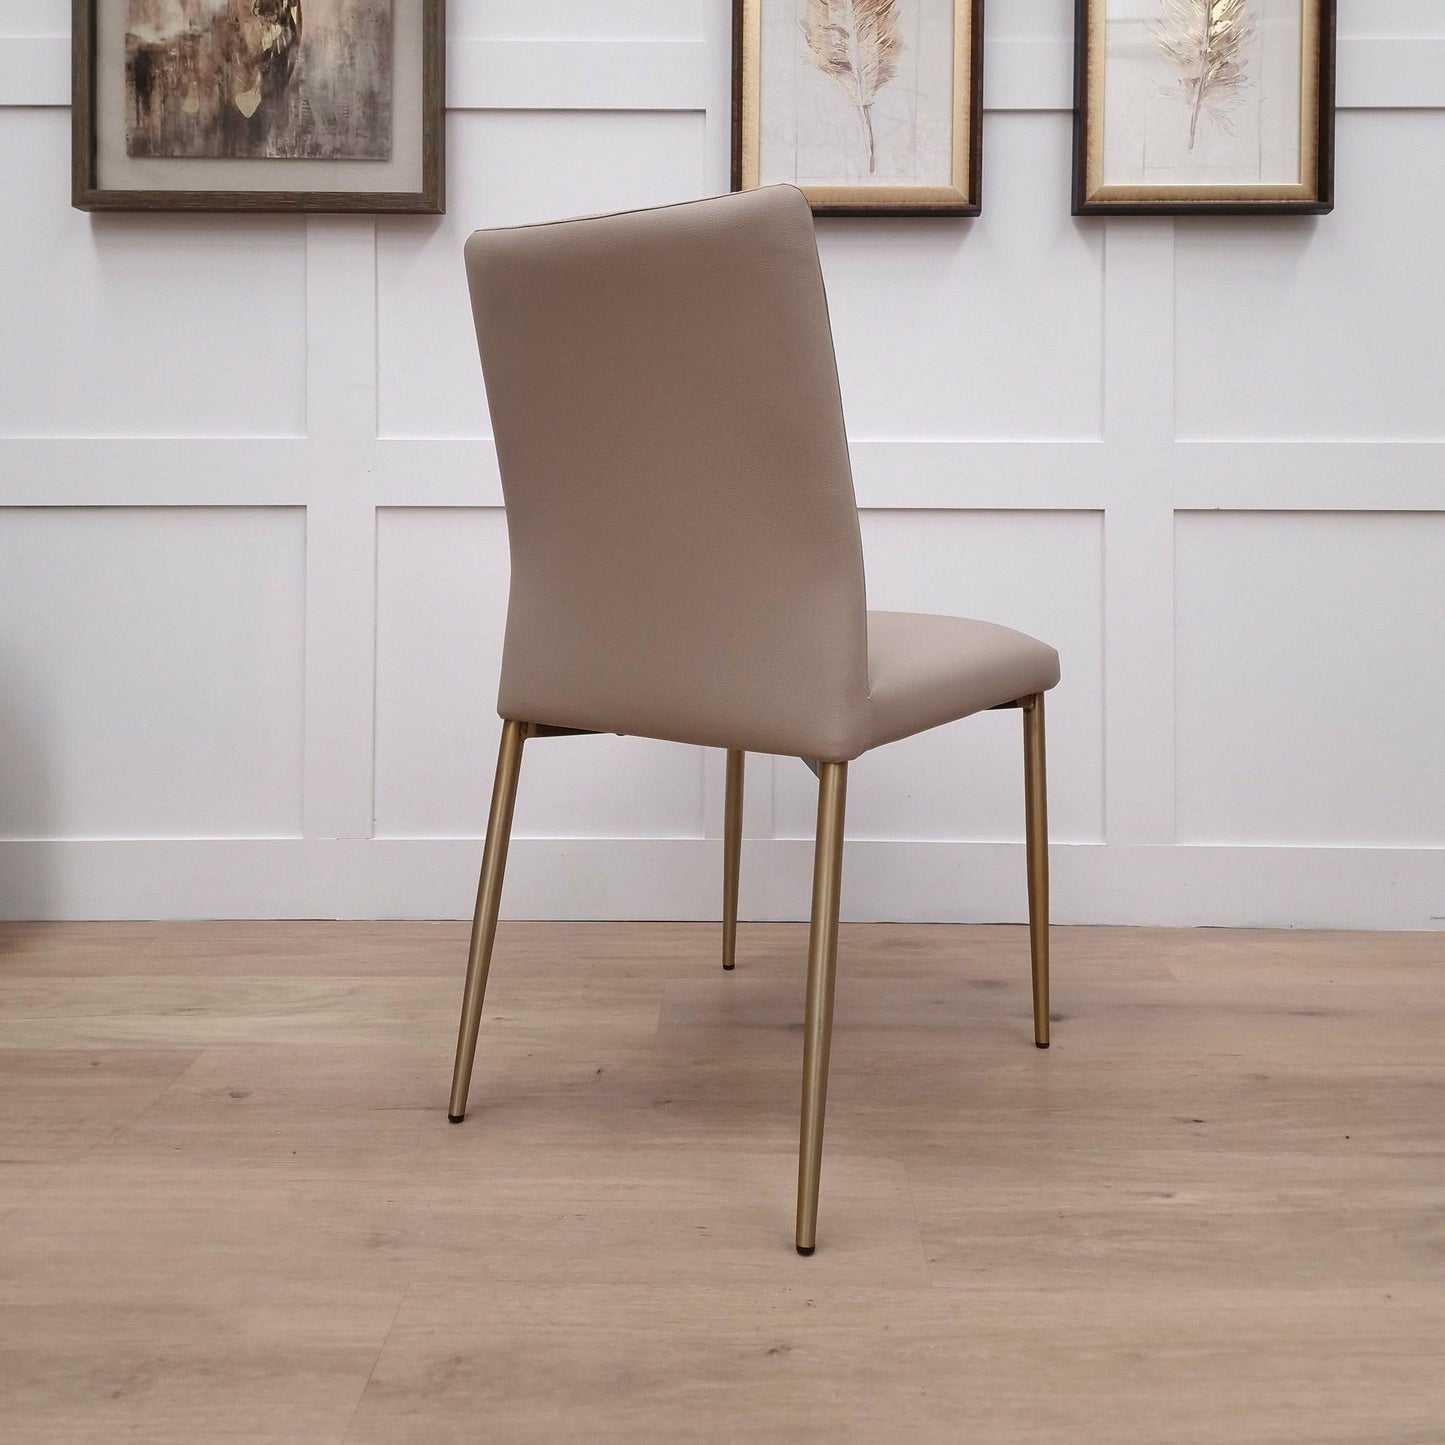 Pair of Light Taupe Vegan Leather Dining Chairs - Anna - Dining Chair - Rydan Interiors